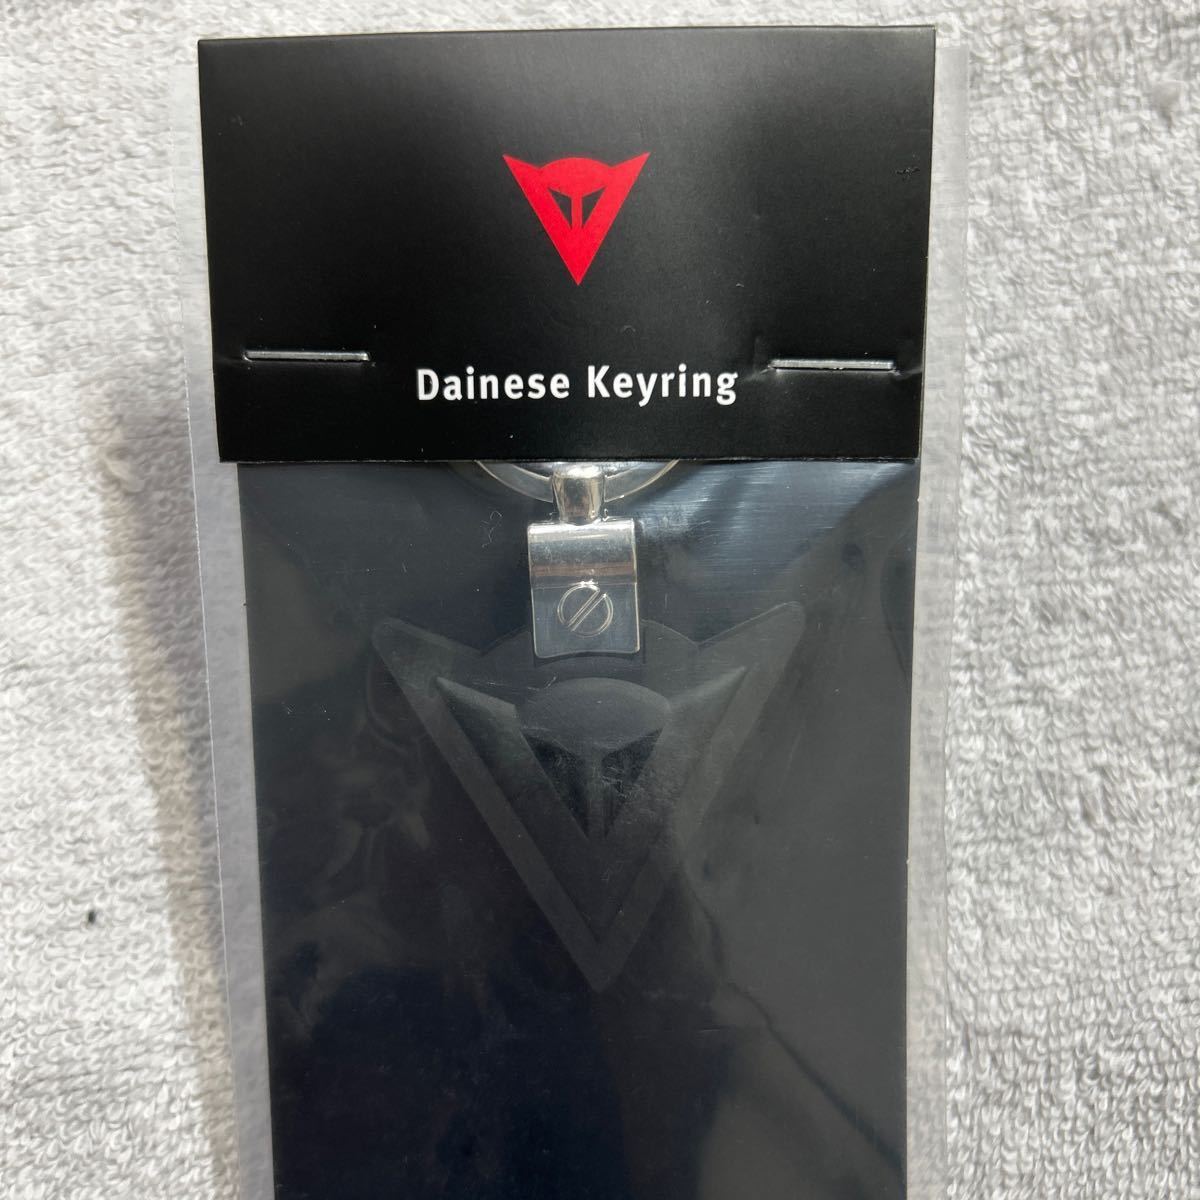  new goods unopened free shipping DAINESE KEYRING large ne-ze key ring rubber accessory small articles A60110-12